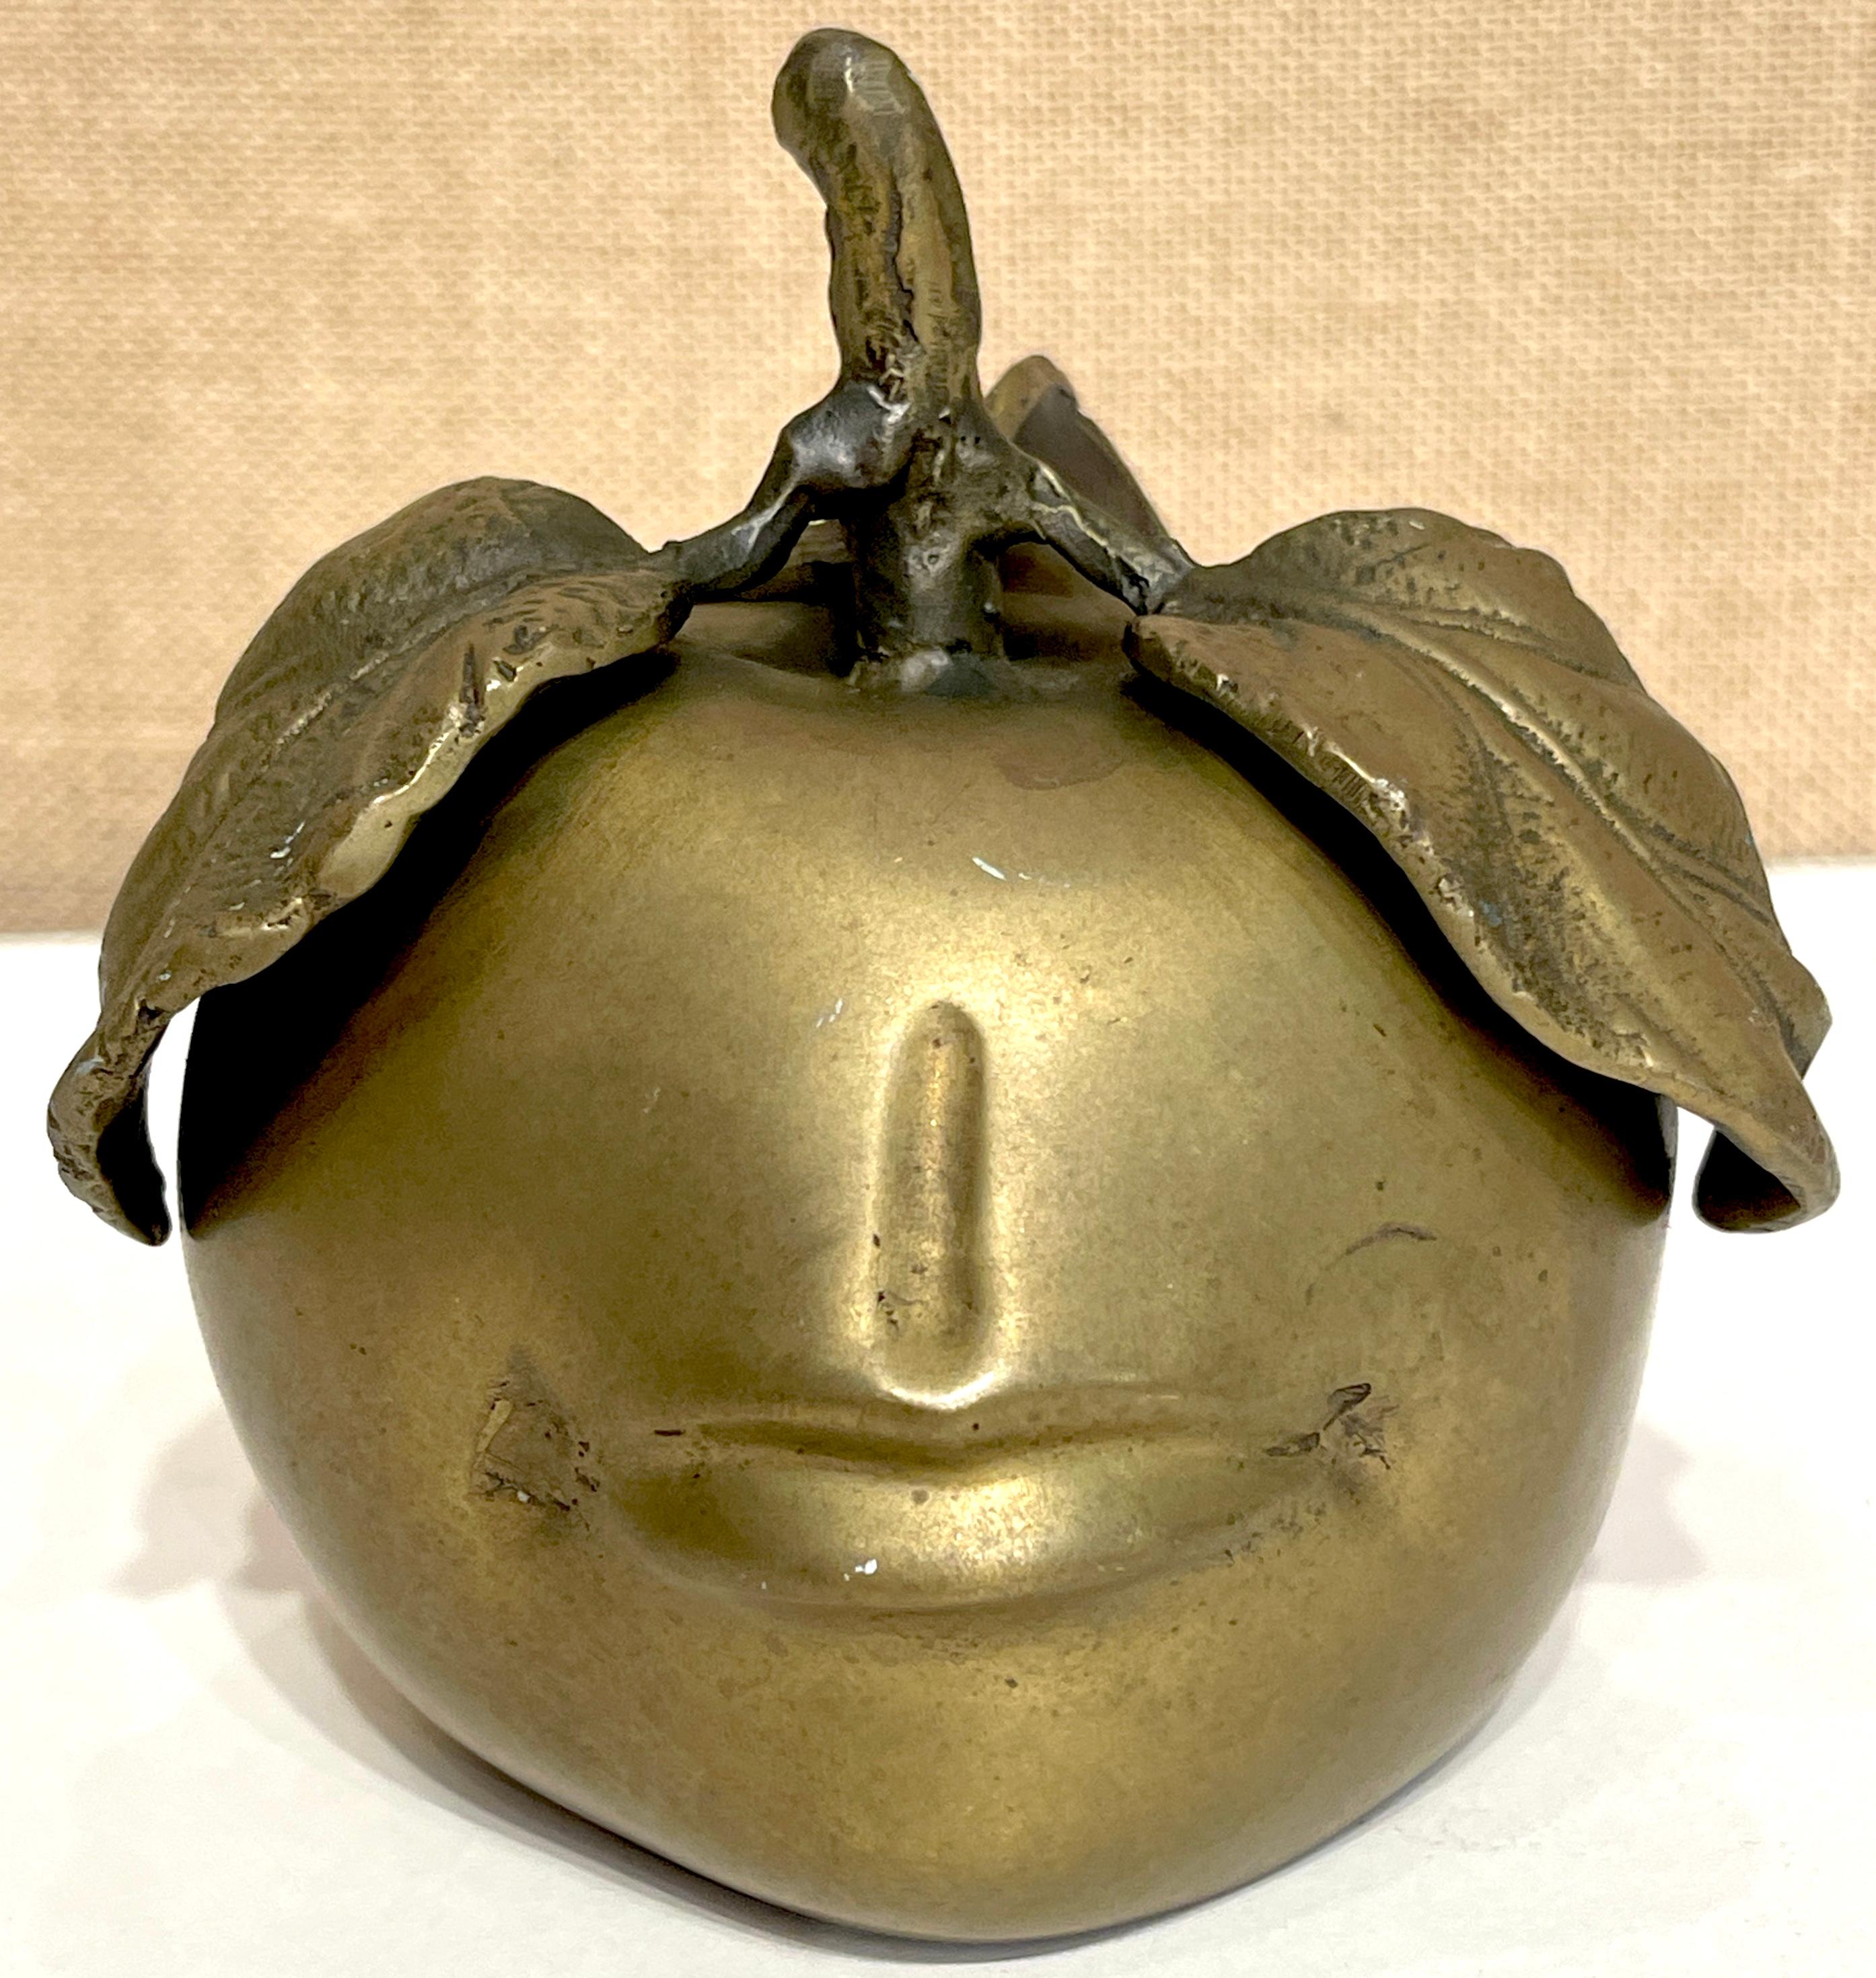 French Bronze Surrealist Bronze Apple Sculpture Style of Claude Lalanne

A charming French Bronze Surrealist Apple Sculpture, made in the style reminiscent of the renowned artist Claude Lalanne. Standing at a modest 5 inches in height and 5 inches